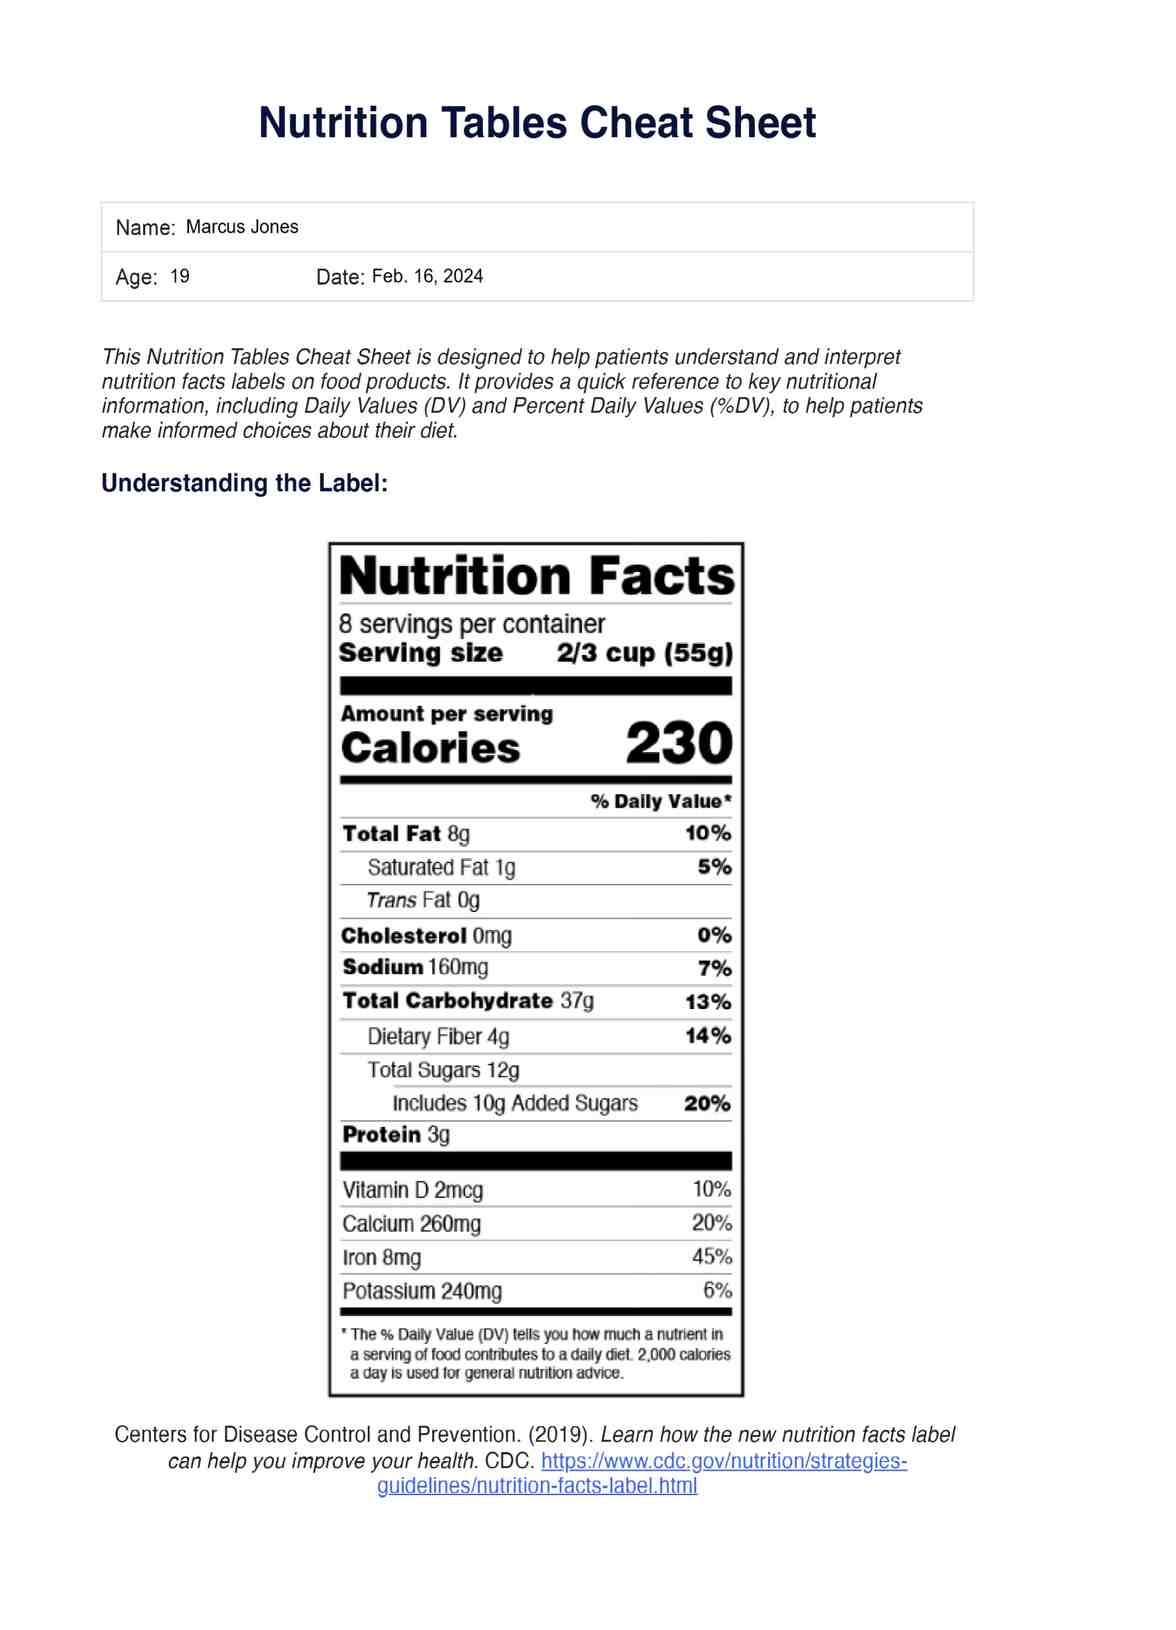 Nutrition Tables Cheat Sheet PDF Example